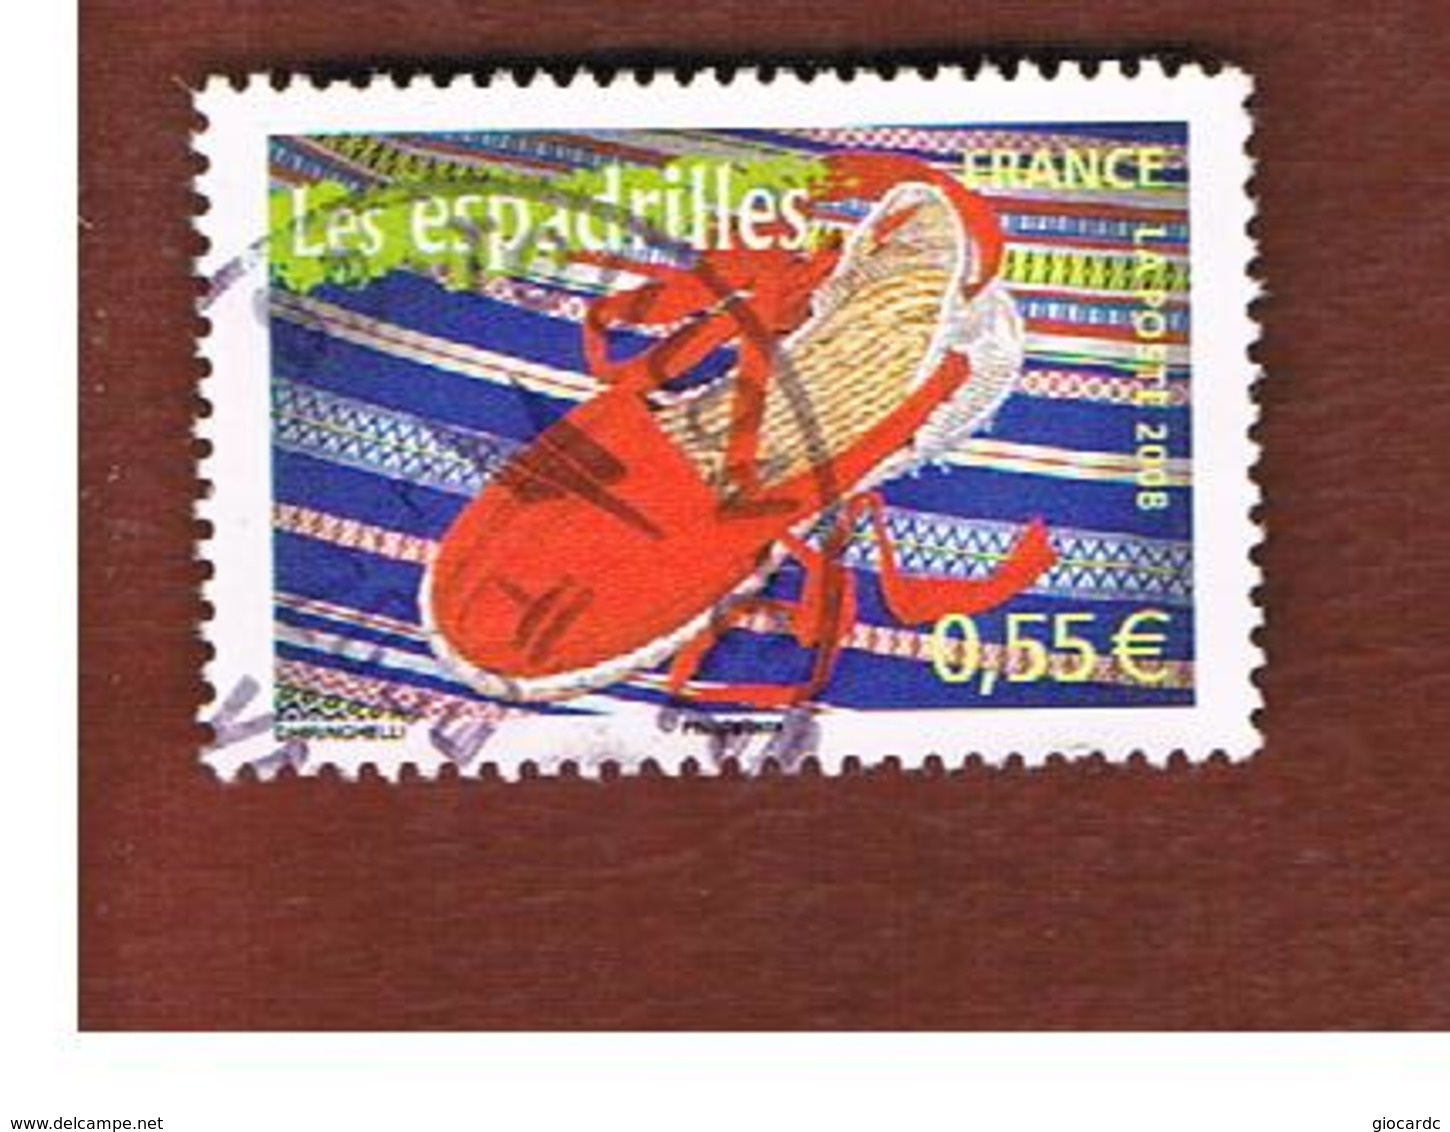 FRANCIA (FRANCE) -  YV 4260   -           2008  ESPADRILLES                (FROM BF)      - USED - Used Stamps